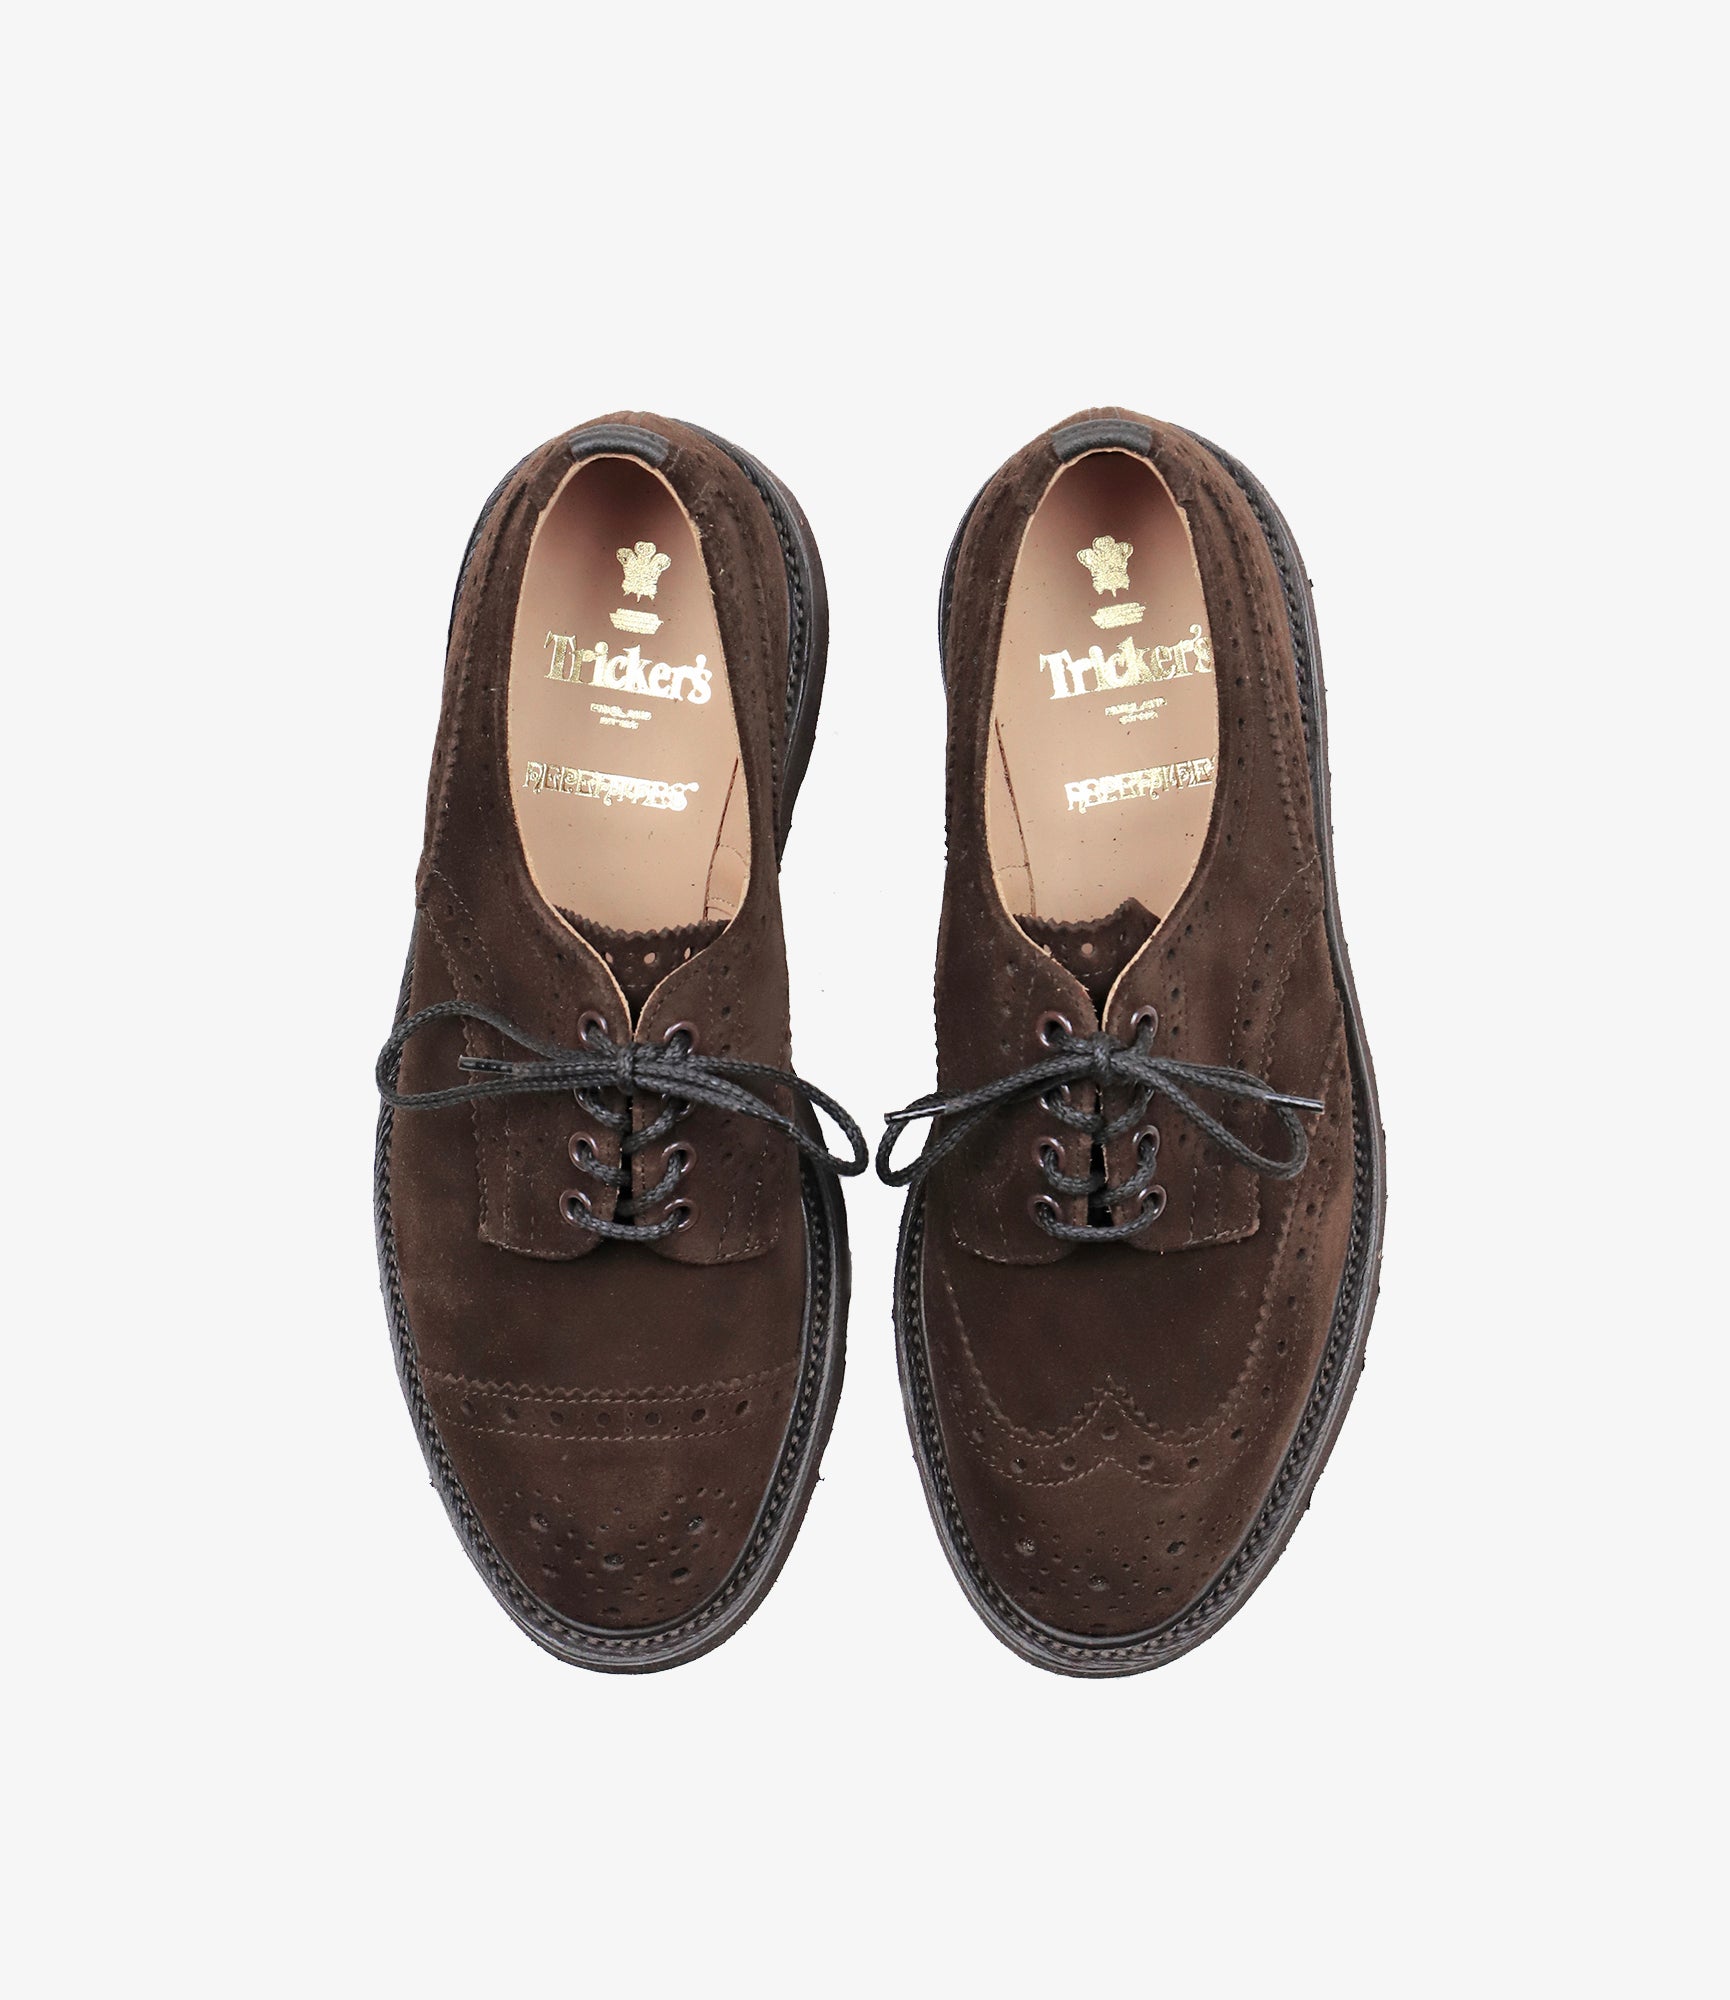 Tricker's x Nepenthes Asymmetric Gibson Brogues - Moreflex Sole - Brown Suede